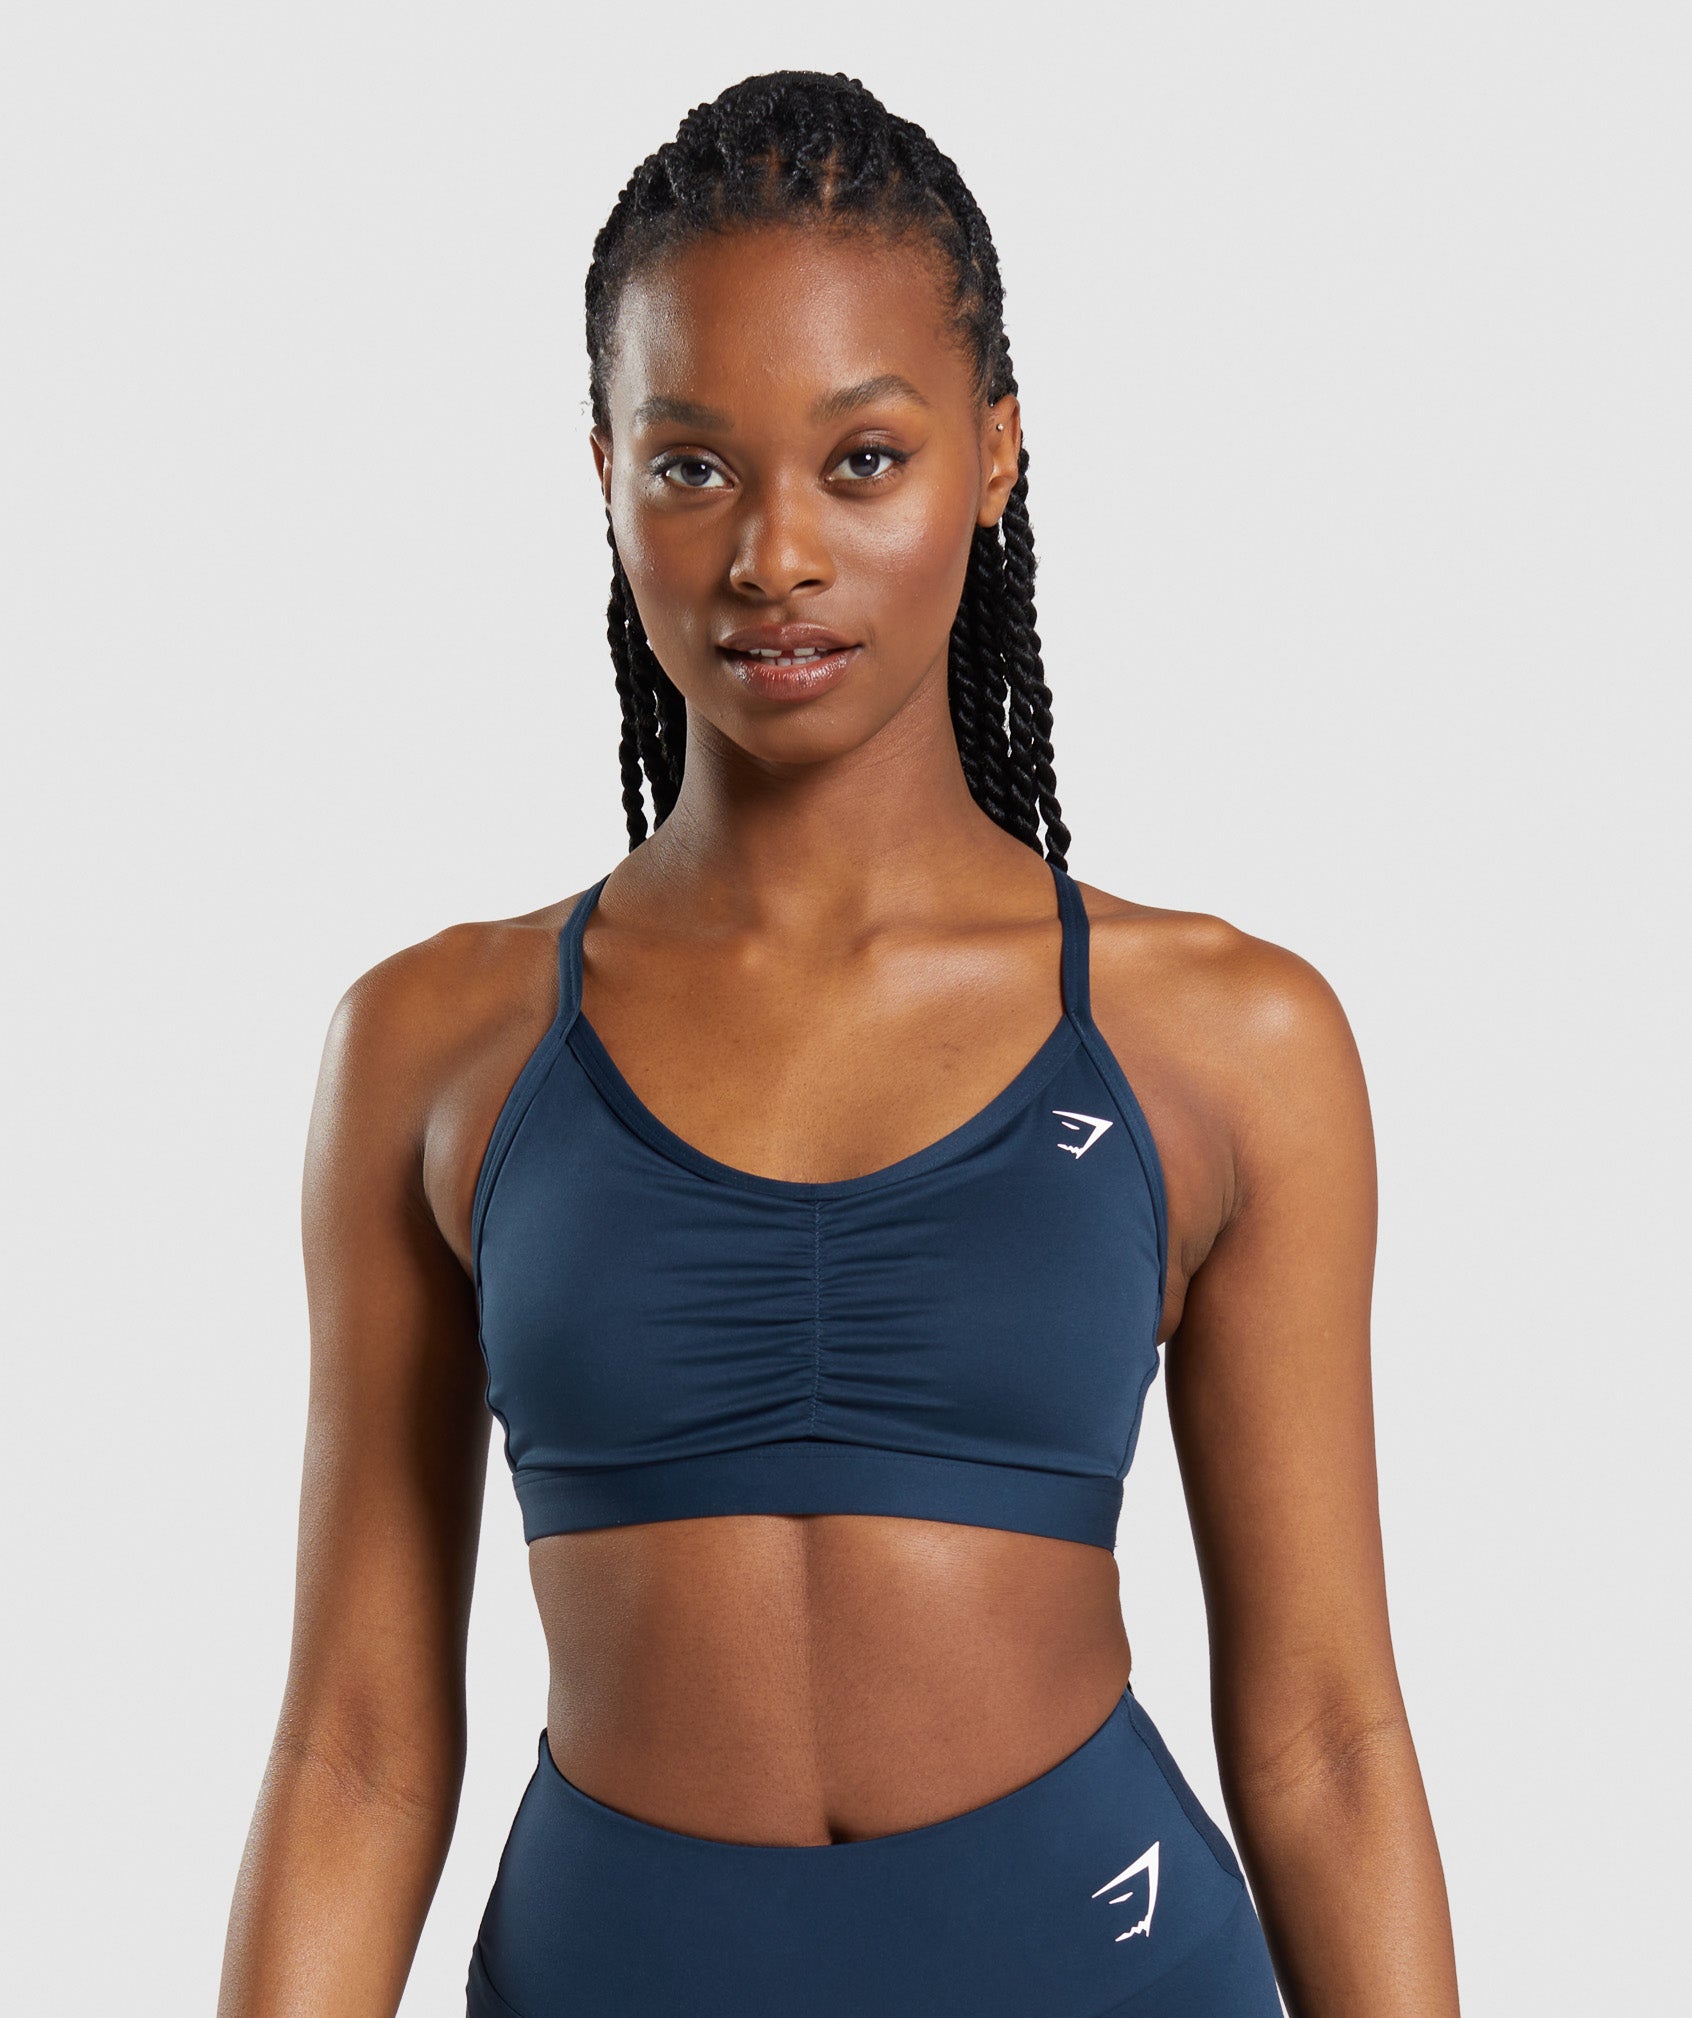 Sports Bra Running Gym Yoga Workout Fitness Top Sizes 32A - 34C –  Worsley_wear